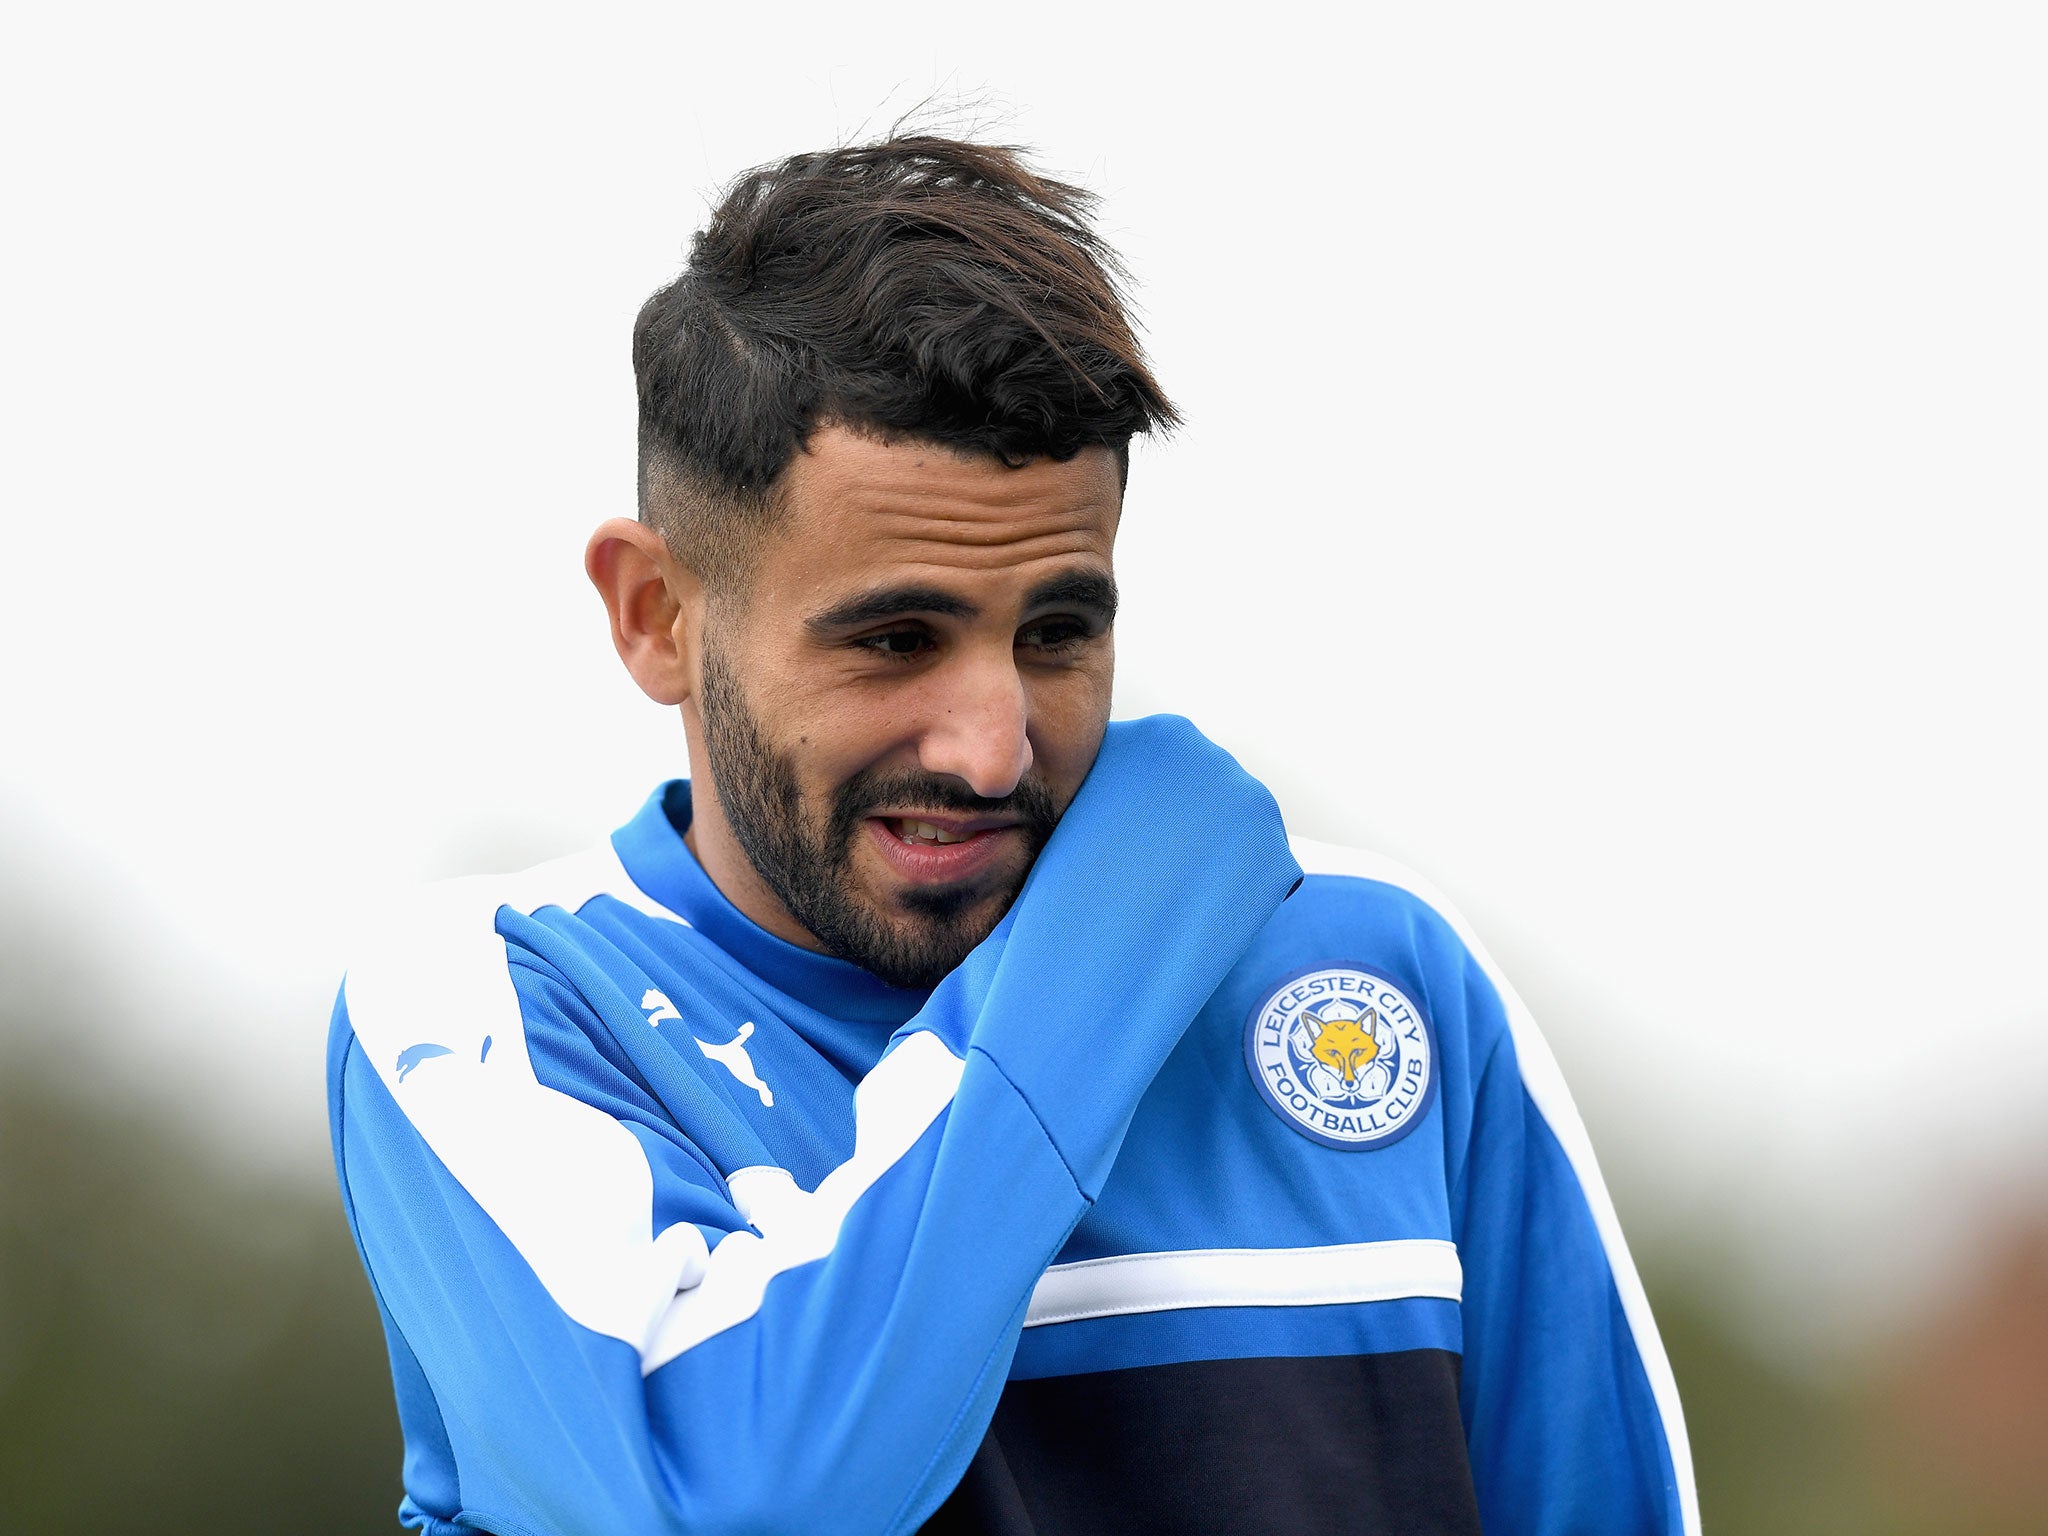 Mahrez won't start for the Foxes against Chelsea